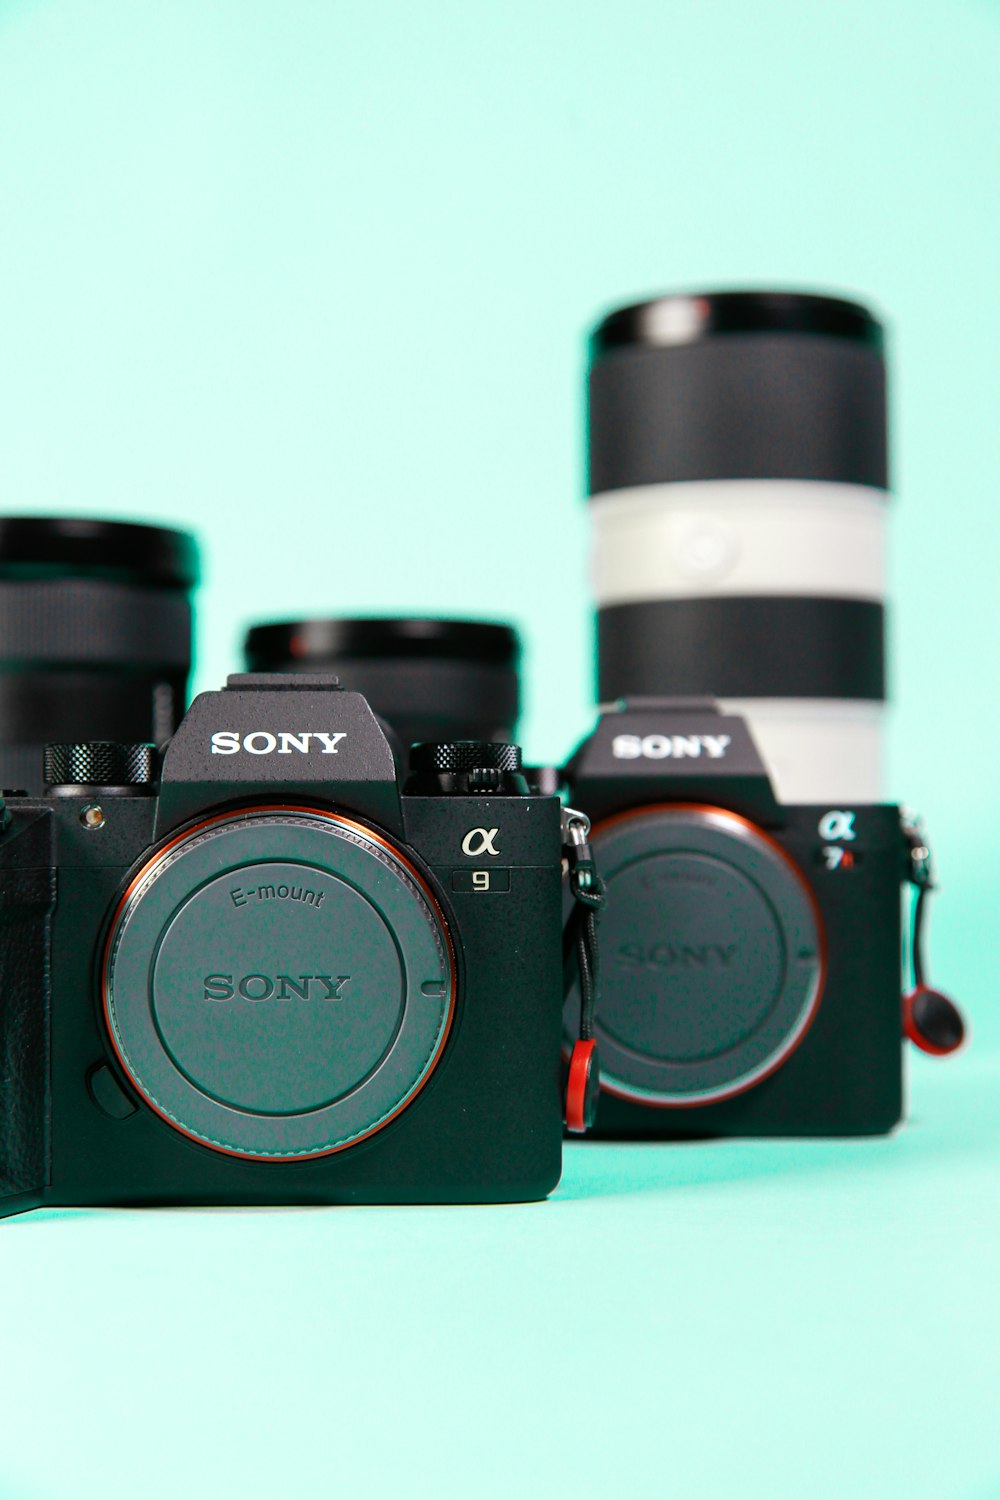 two Sony DSLR cameras